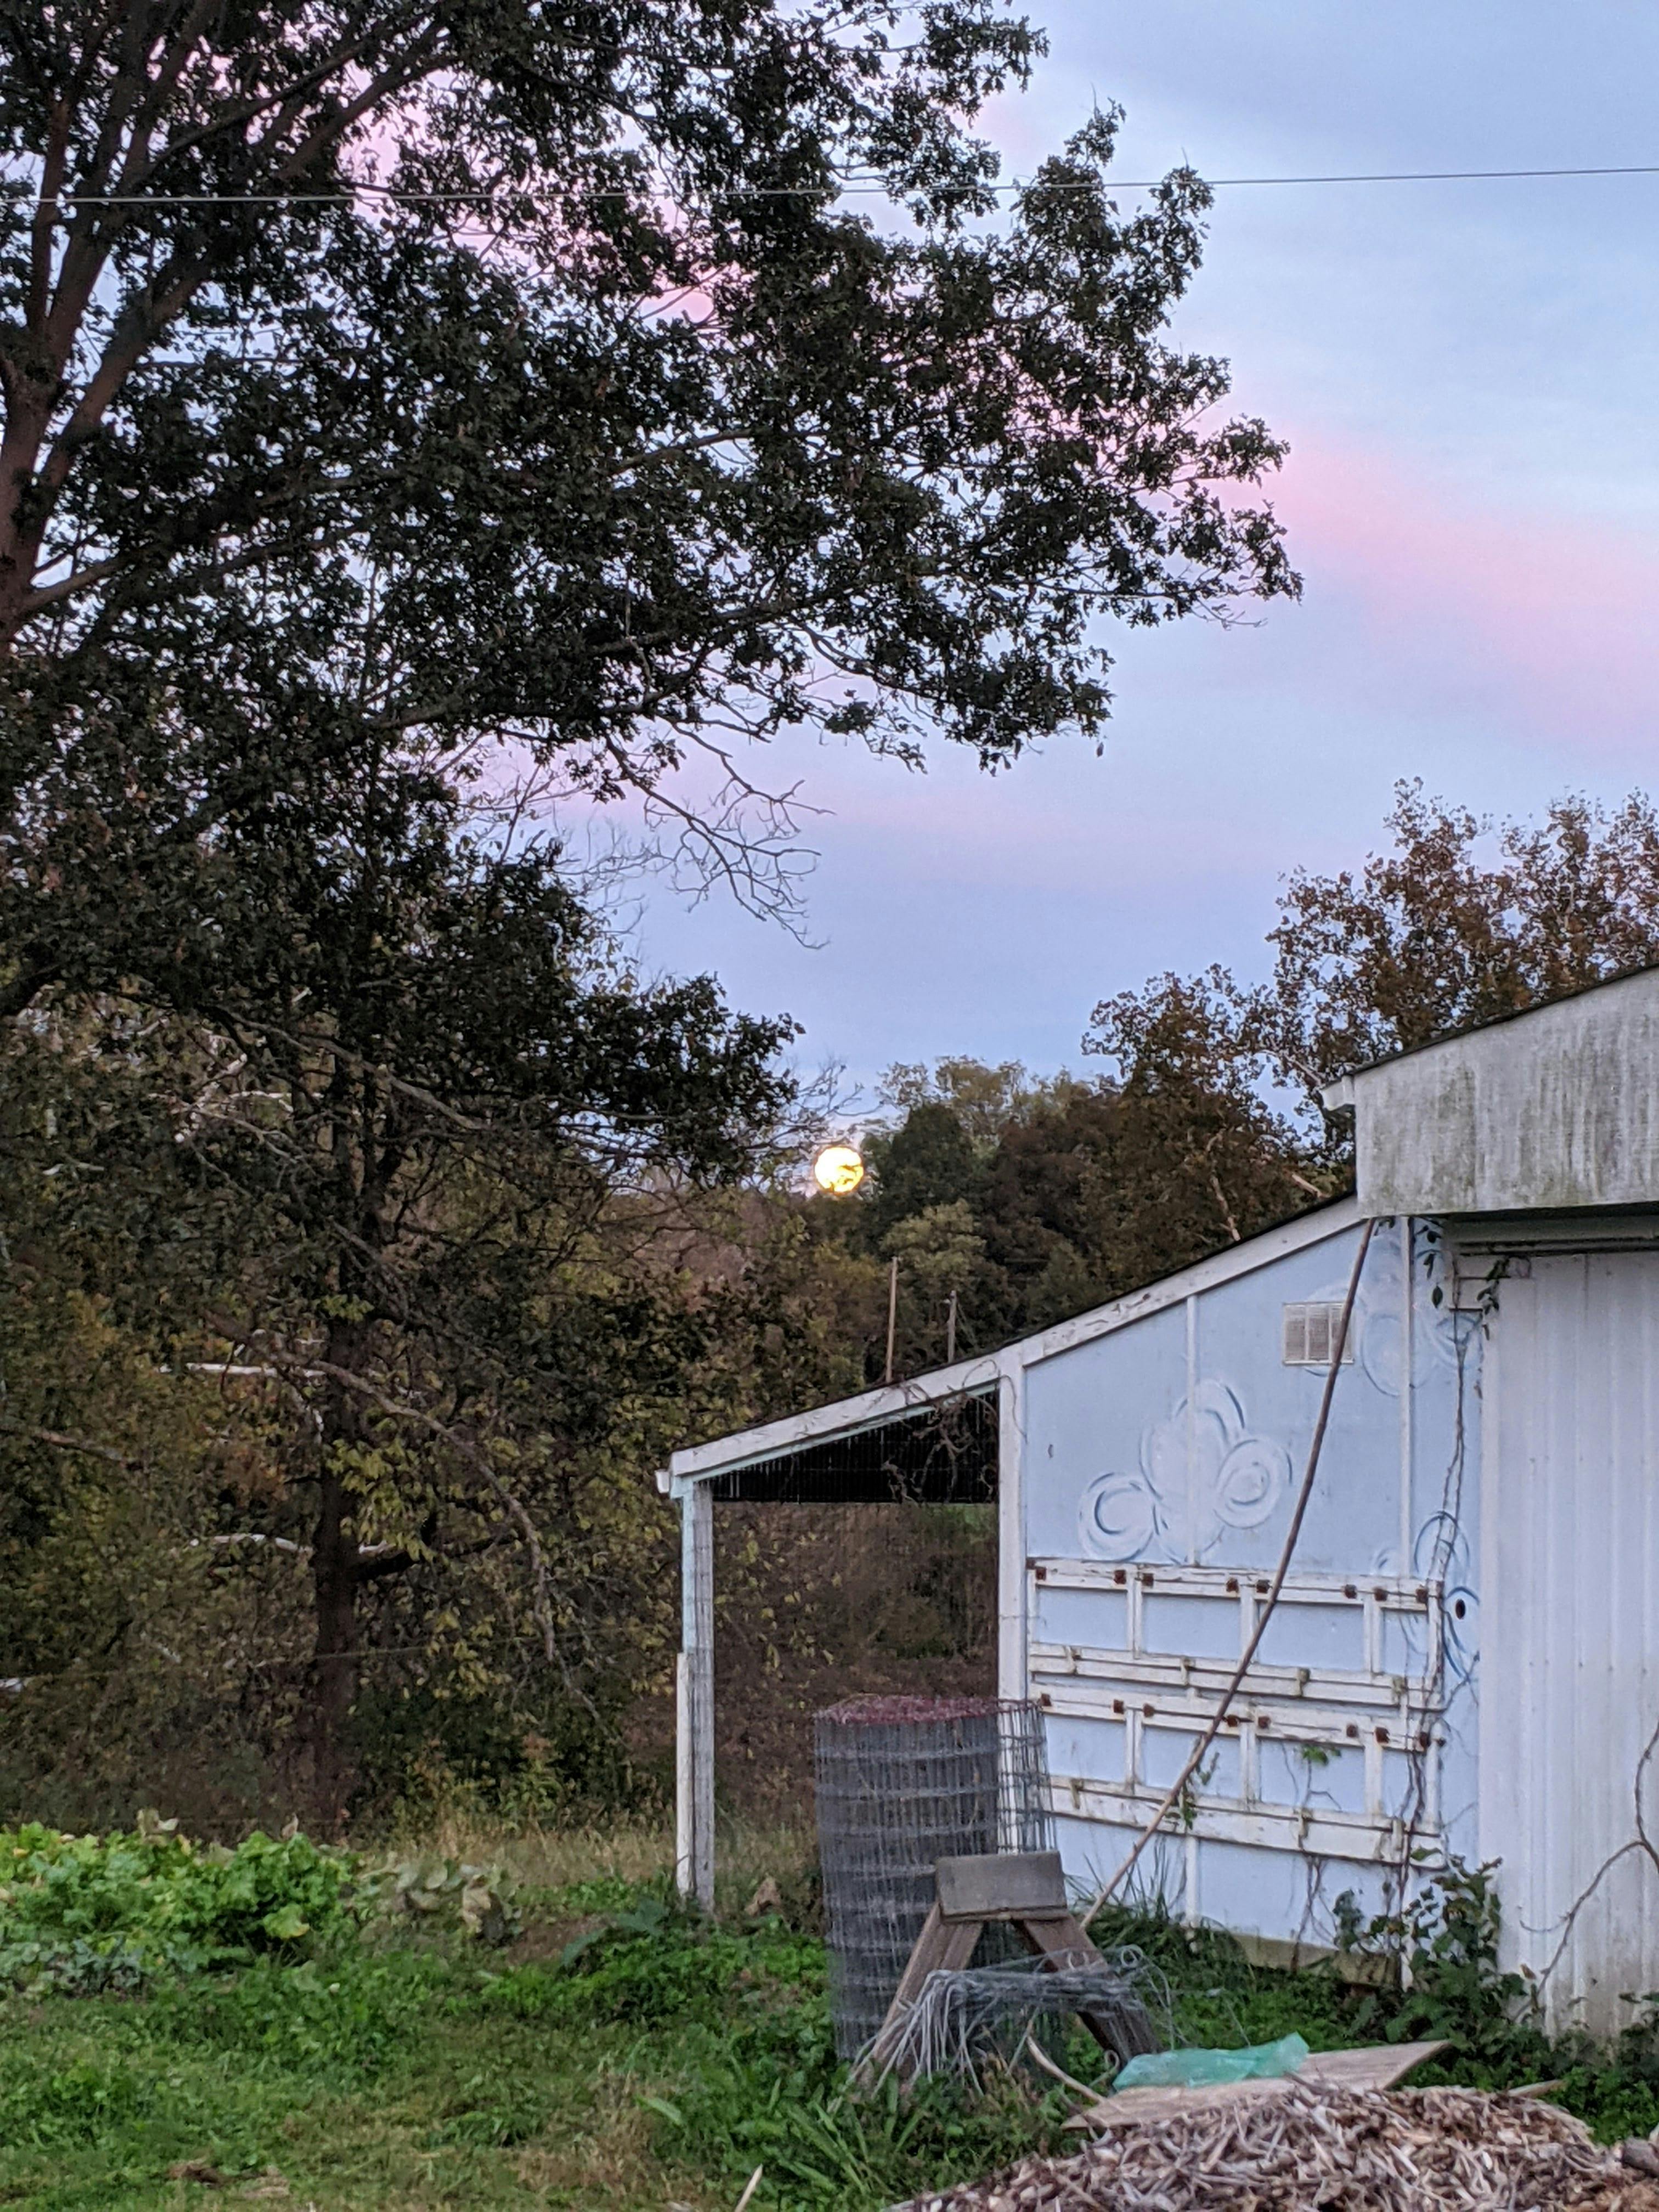 Sunset and Moonrise at the farm